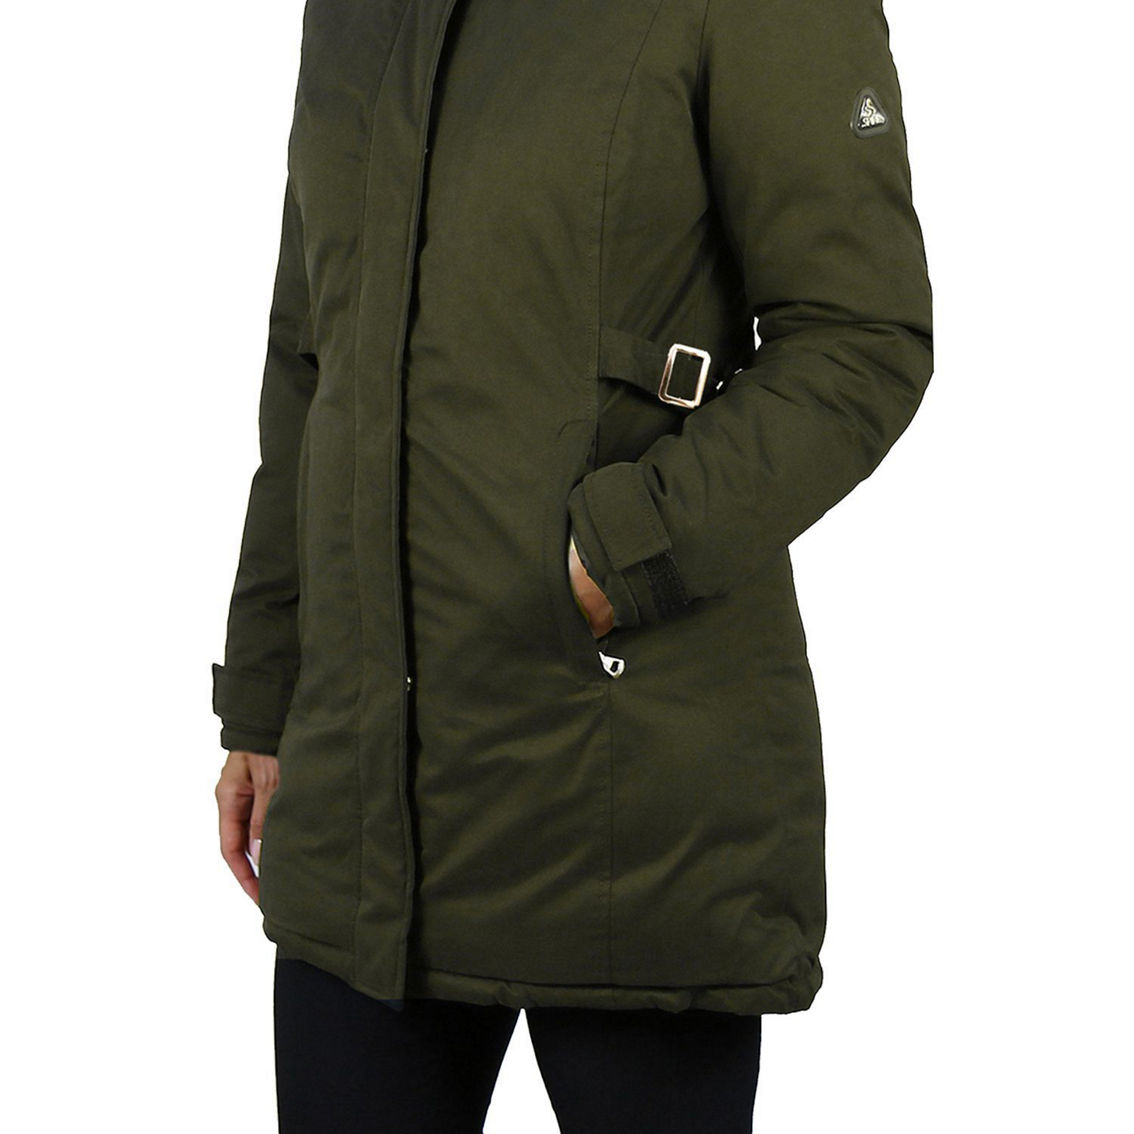 Spire By Galaxy Women's Heavyweight Parka Jacket With Detachable Faux Fur Hood - Image 3 of 4